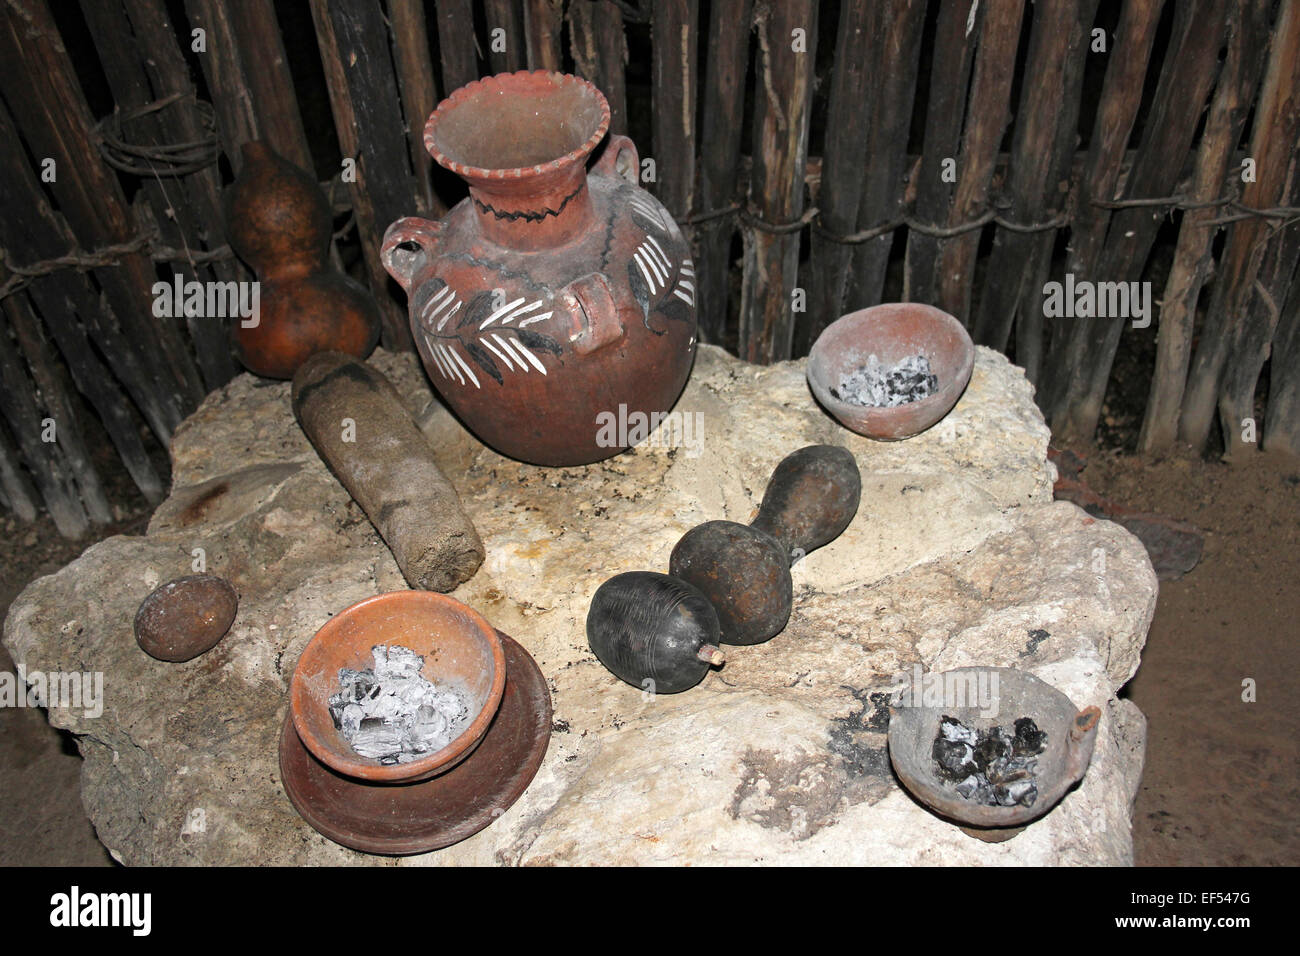 Mayan Pots, Gourds And Incense Burners In The Traditional Maya House At Belize Botanic Gardens Stock Photo